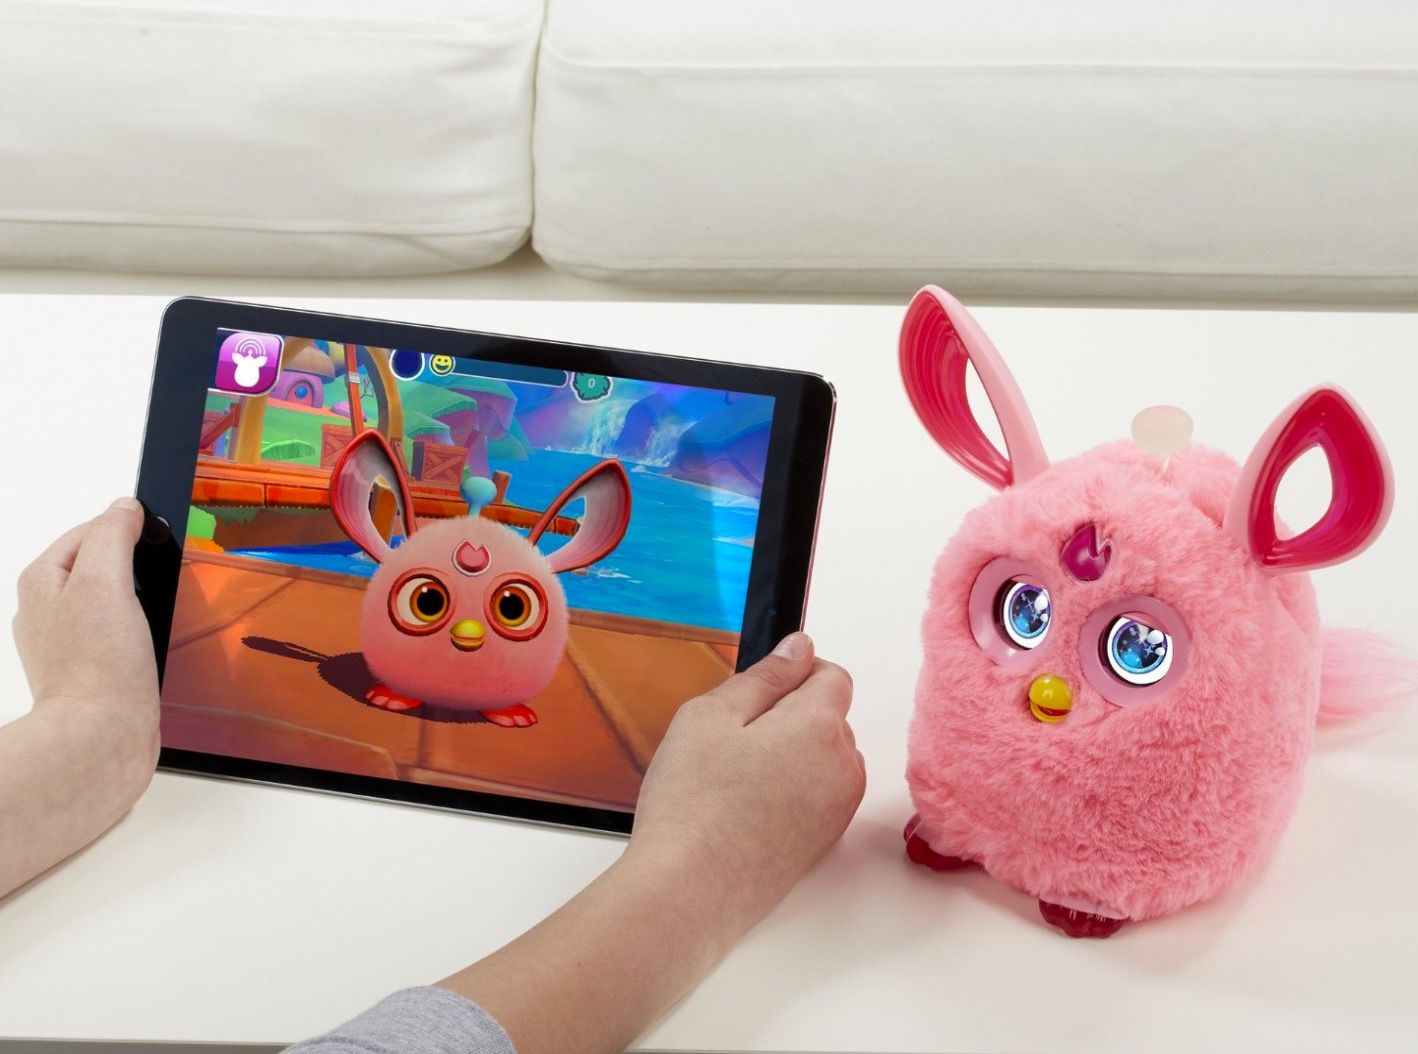 hasbro s furby is now a connected toy with lcd screens for eyes image 4